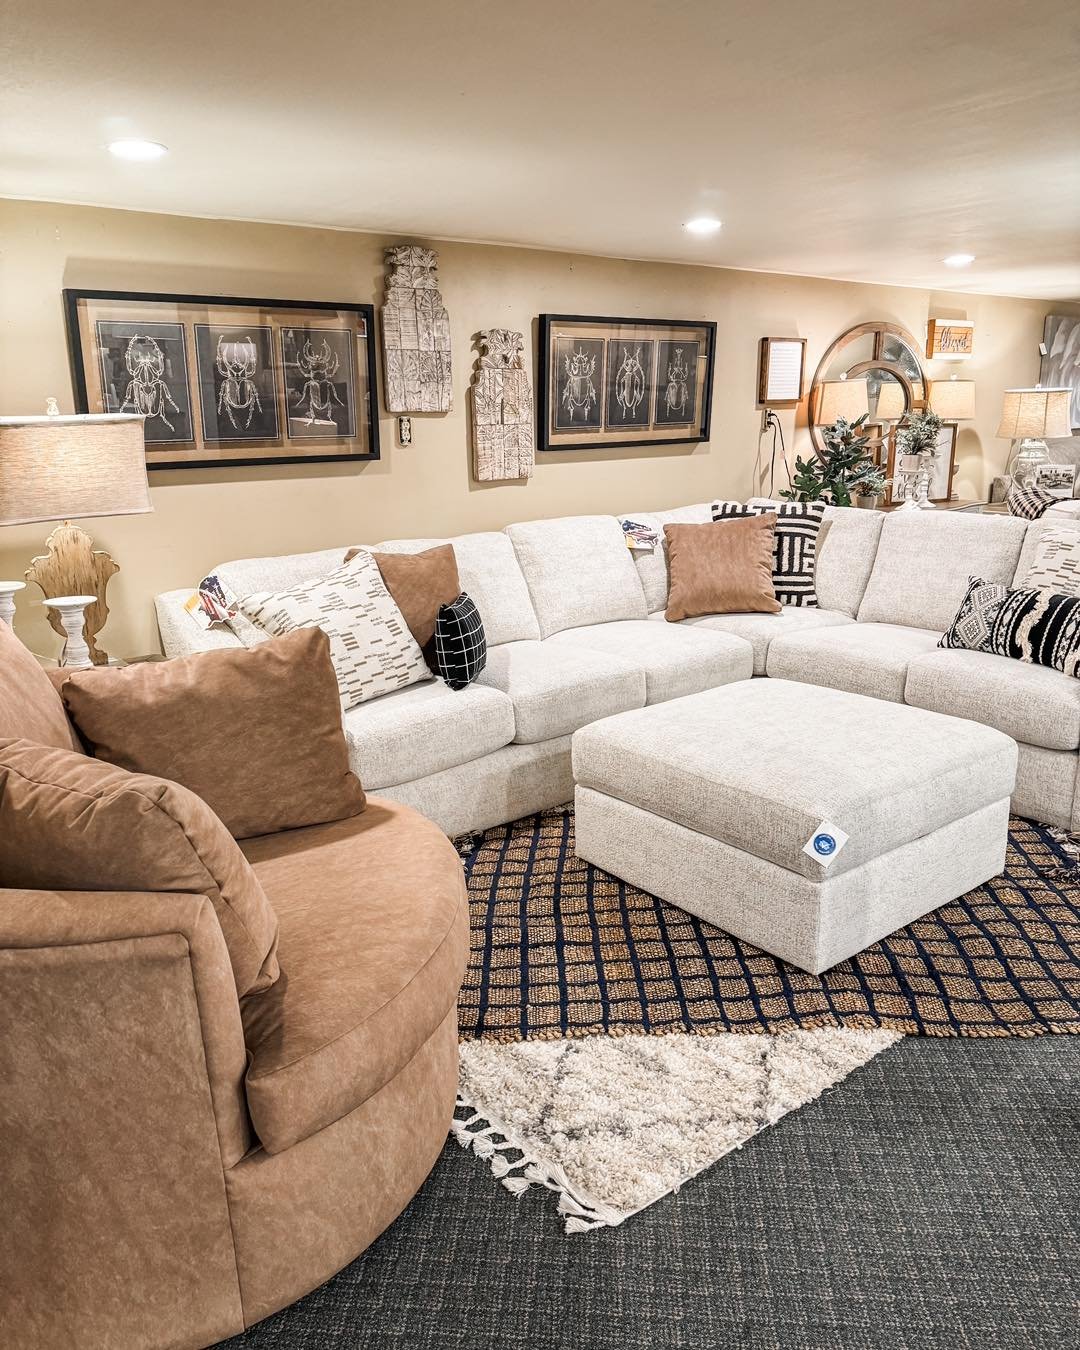 ‼️ NEW ITEM ALERT ‼️ 

Check out this brand new set that just hit our floor! The swivel chair would make for the BEST reading or movie watching spot while the sectional offers up enough sitting space for everyone!

Worried you might not have enough r